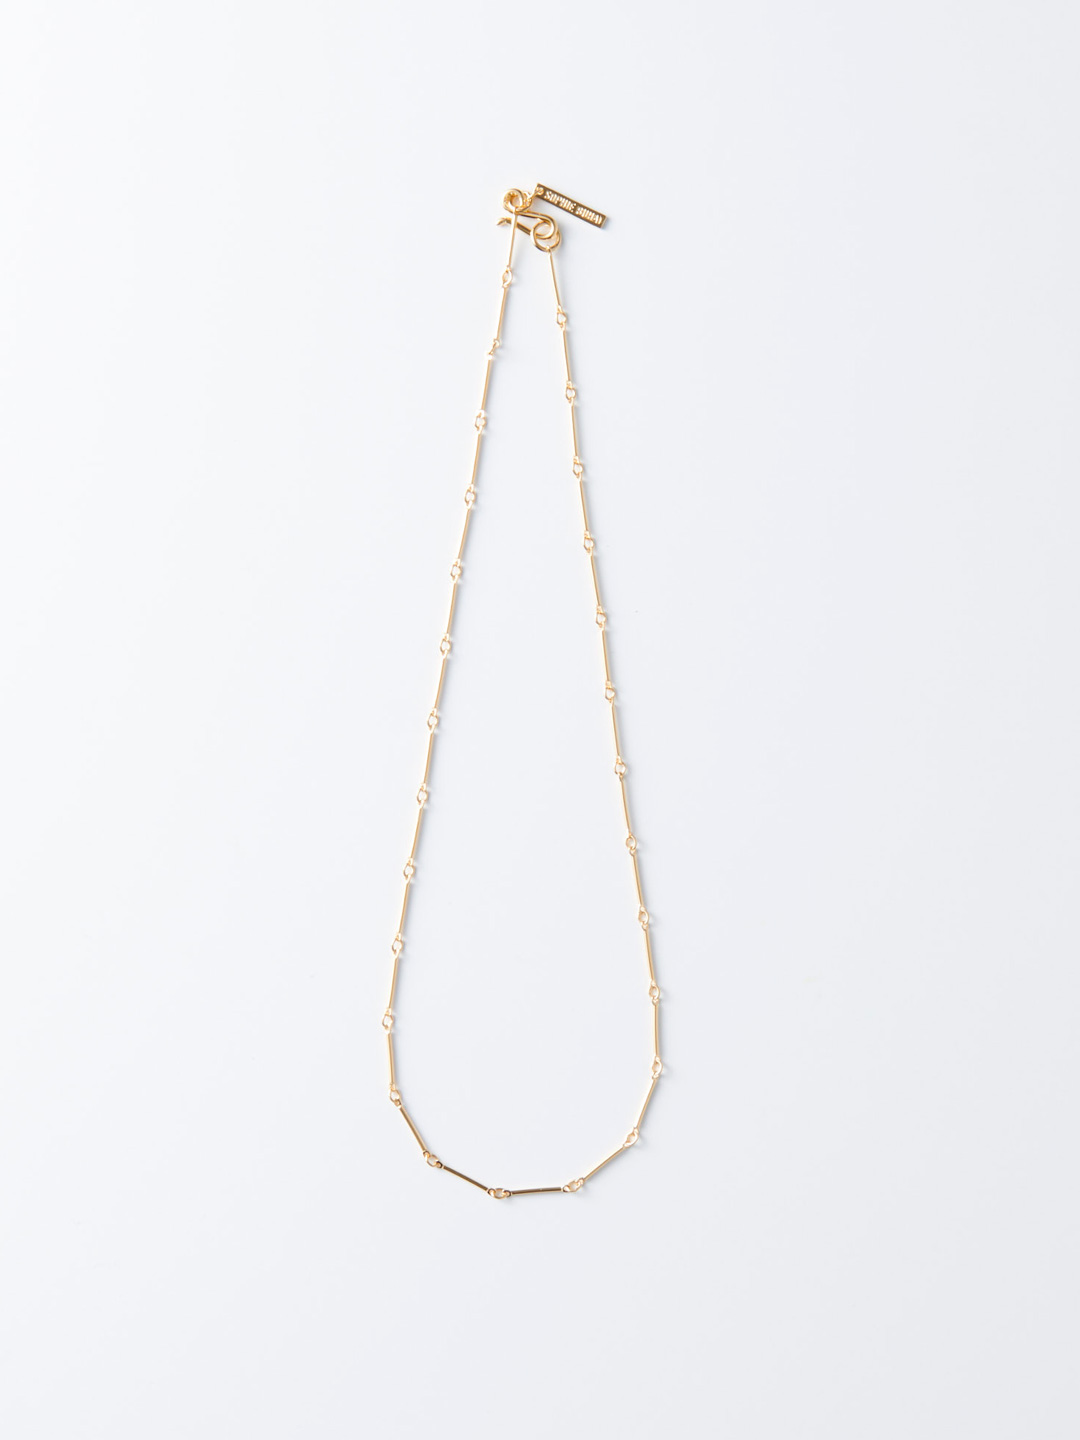 Bar Chain Necklace / 40cm - Gold